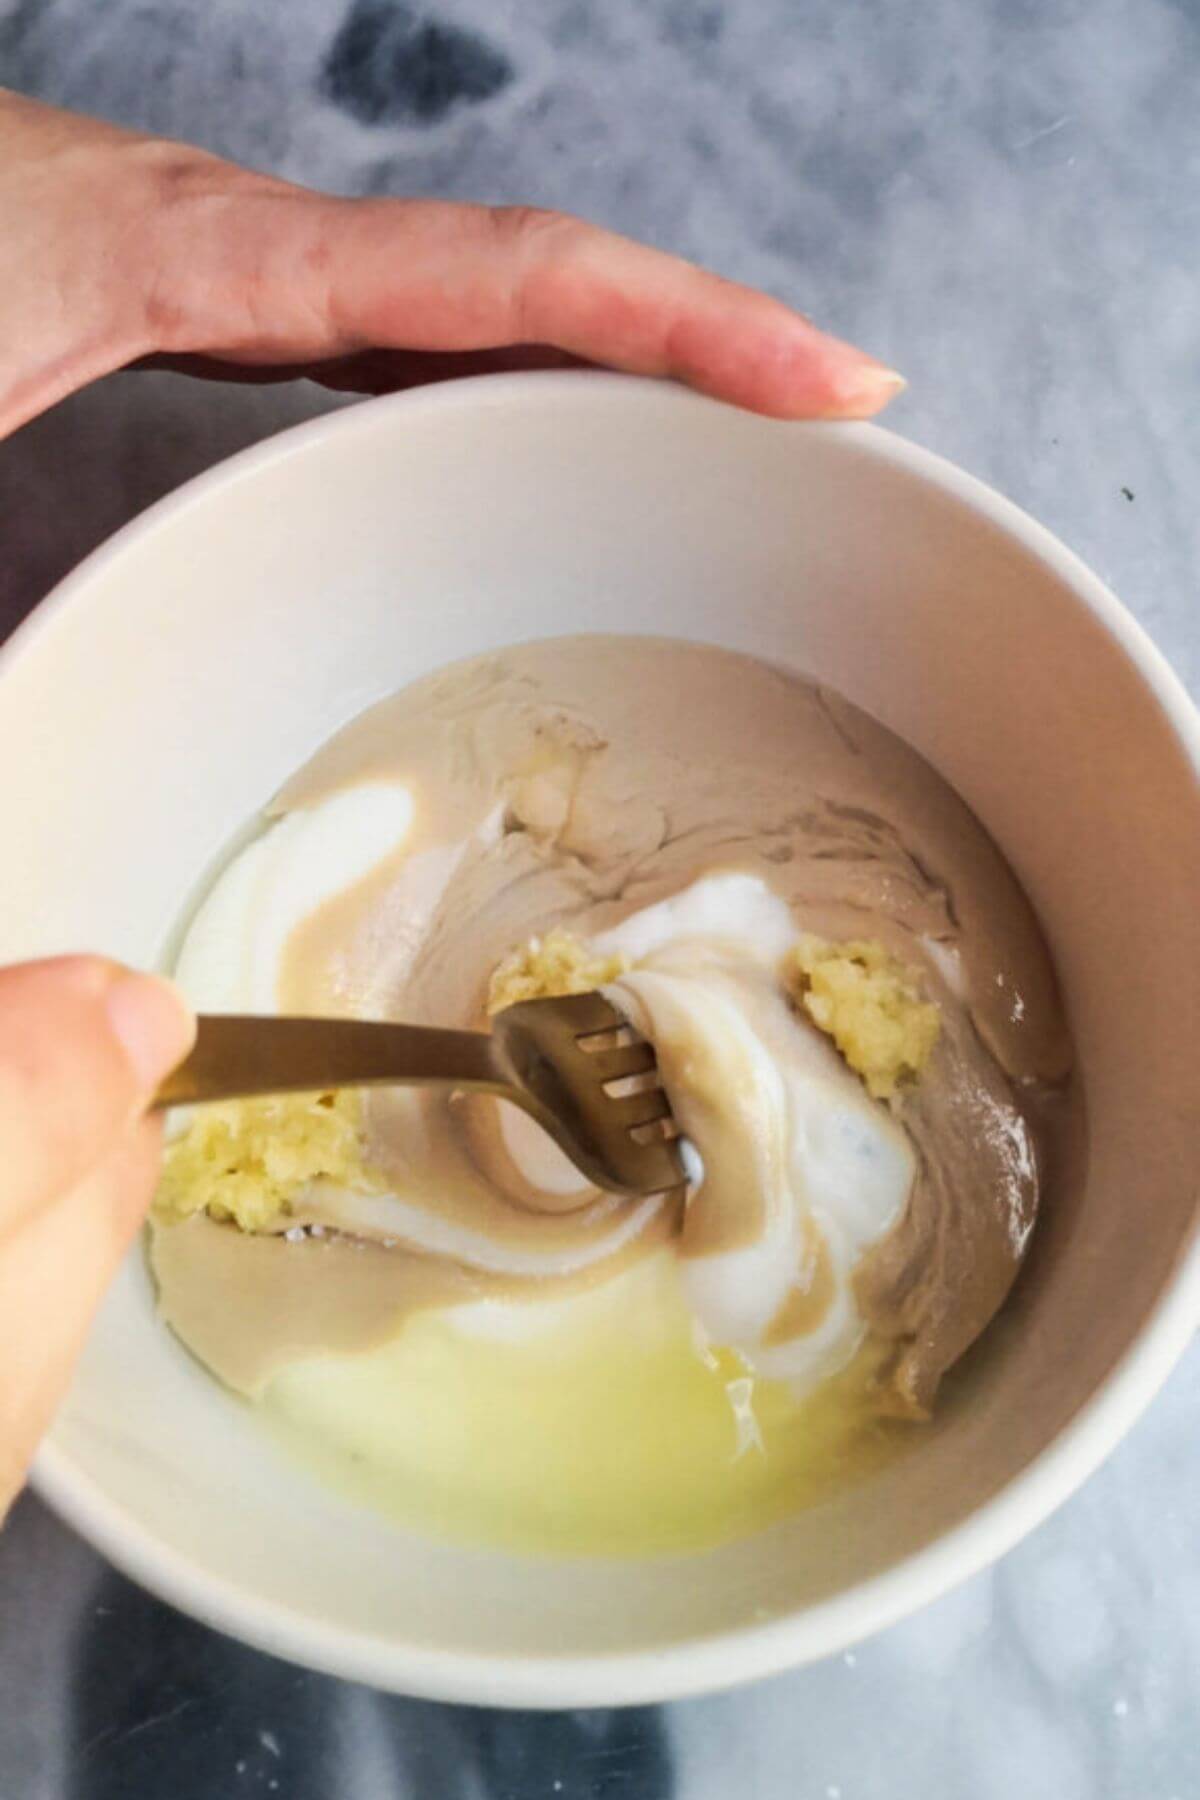 Yogurt tahini sauce ingredients being mixed together with a gold fork in a small white bowl.